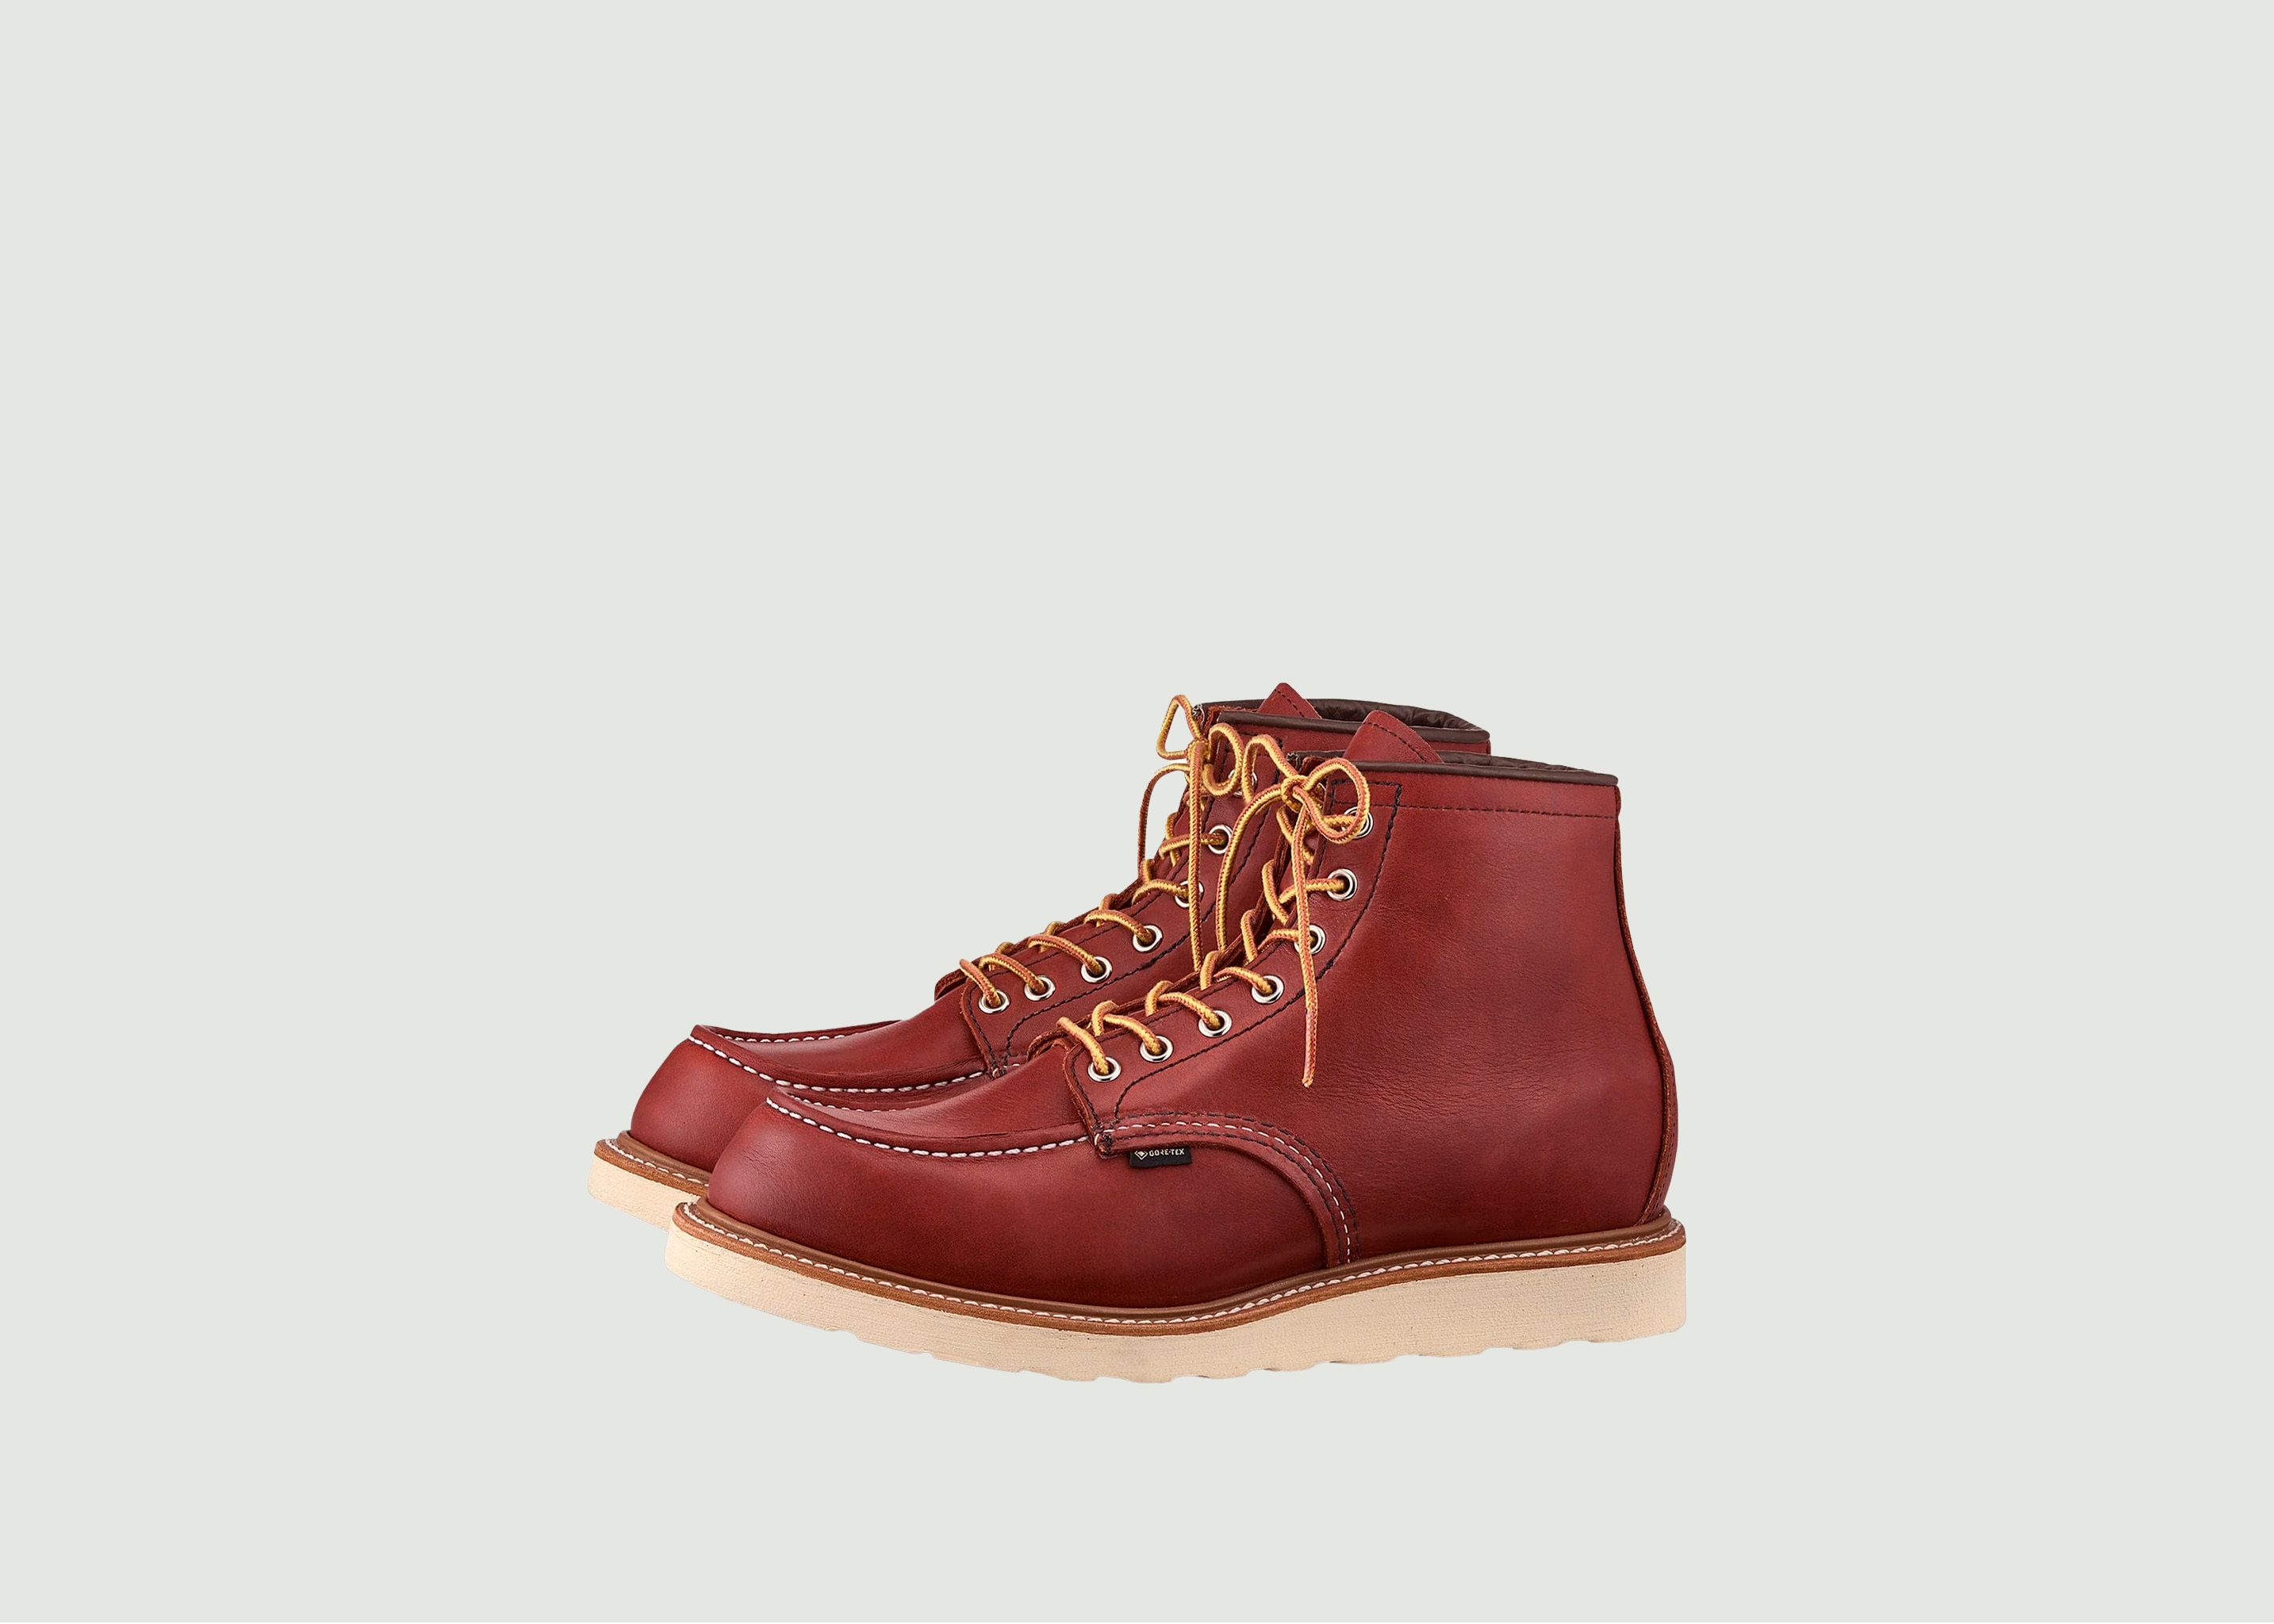 Chaussures Moc Toe				 - Red Wing Shoes